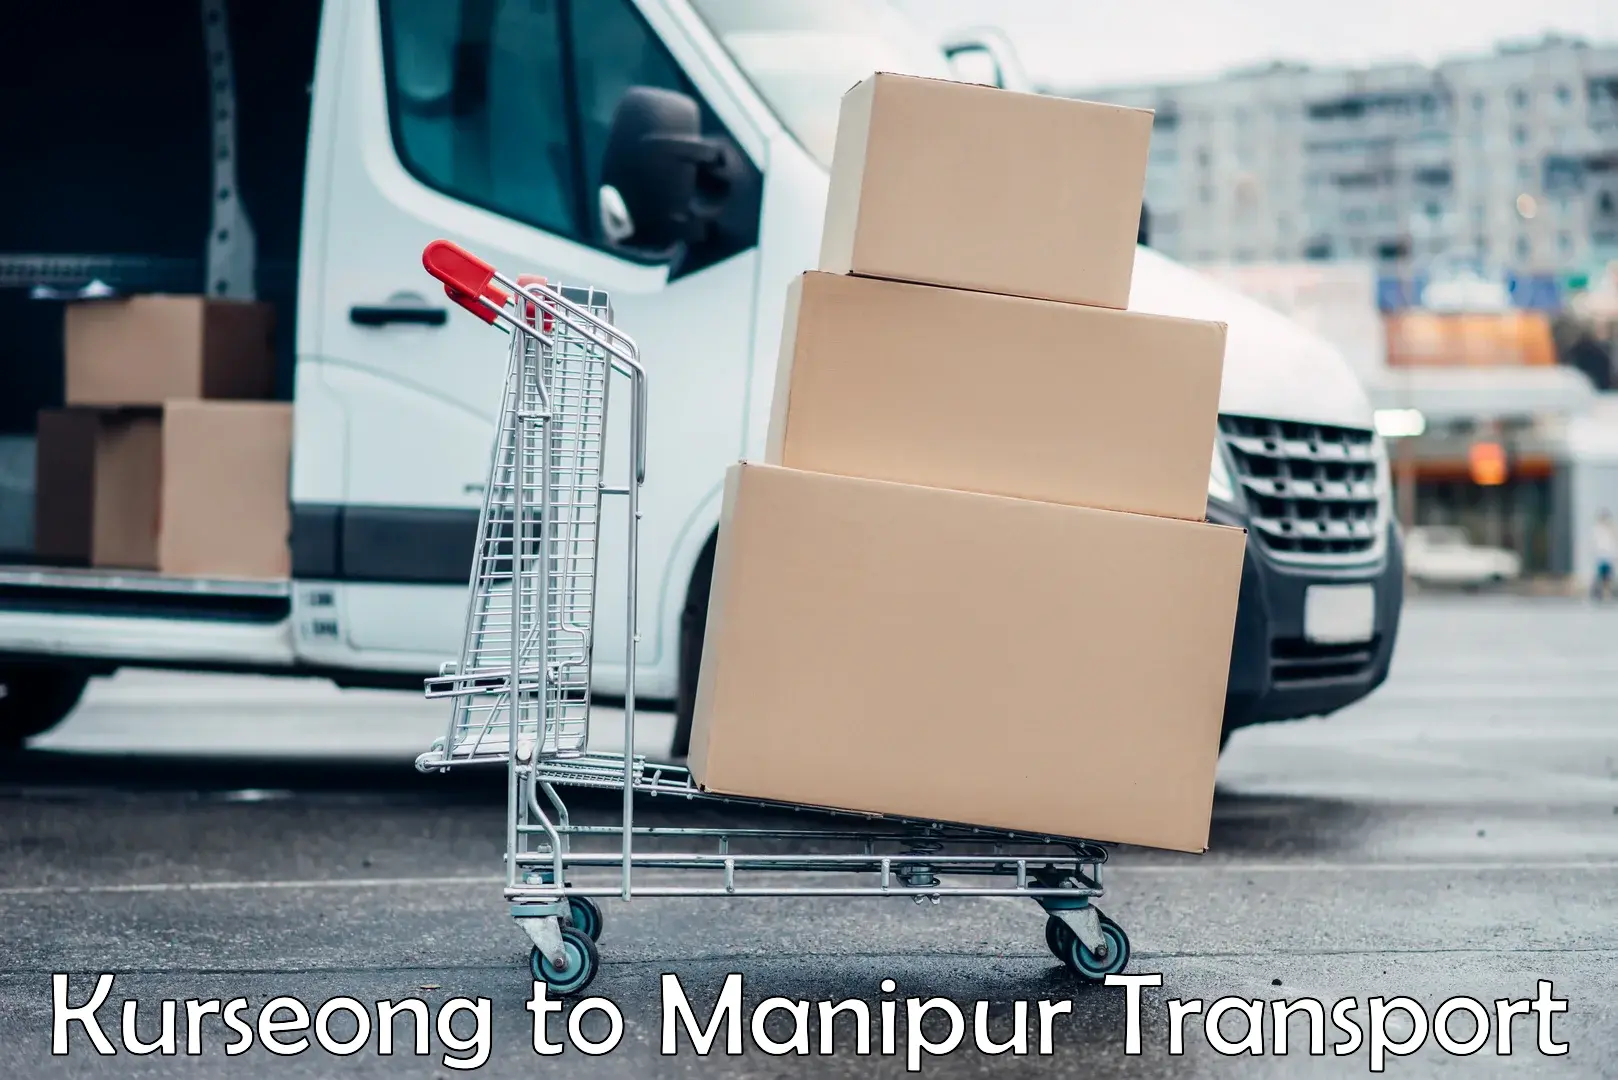 Nearby transport service Kurseong to Manipur